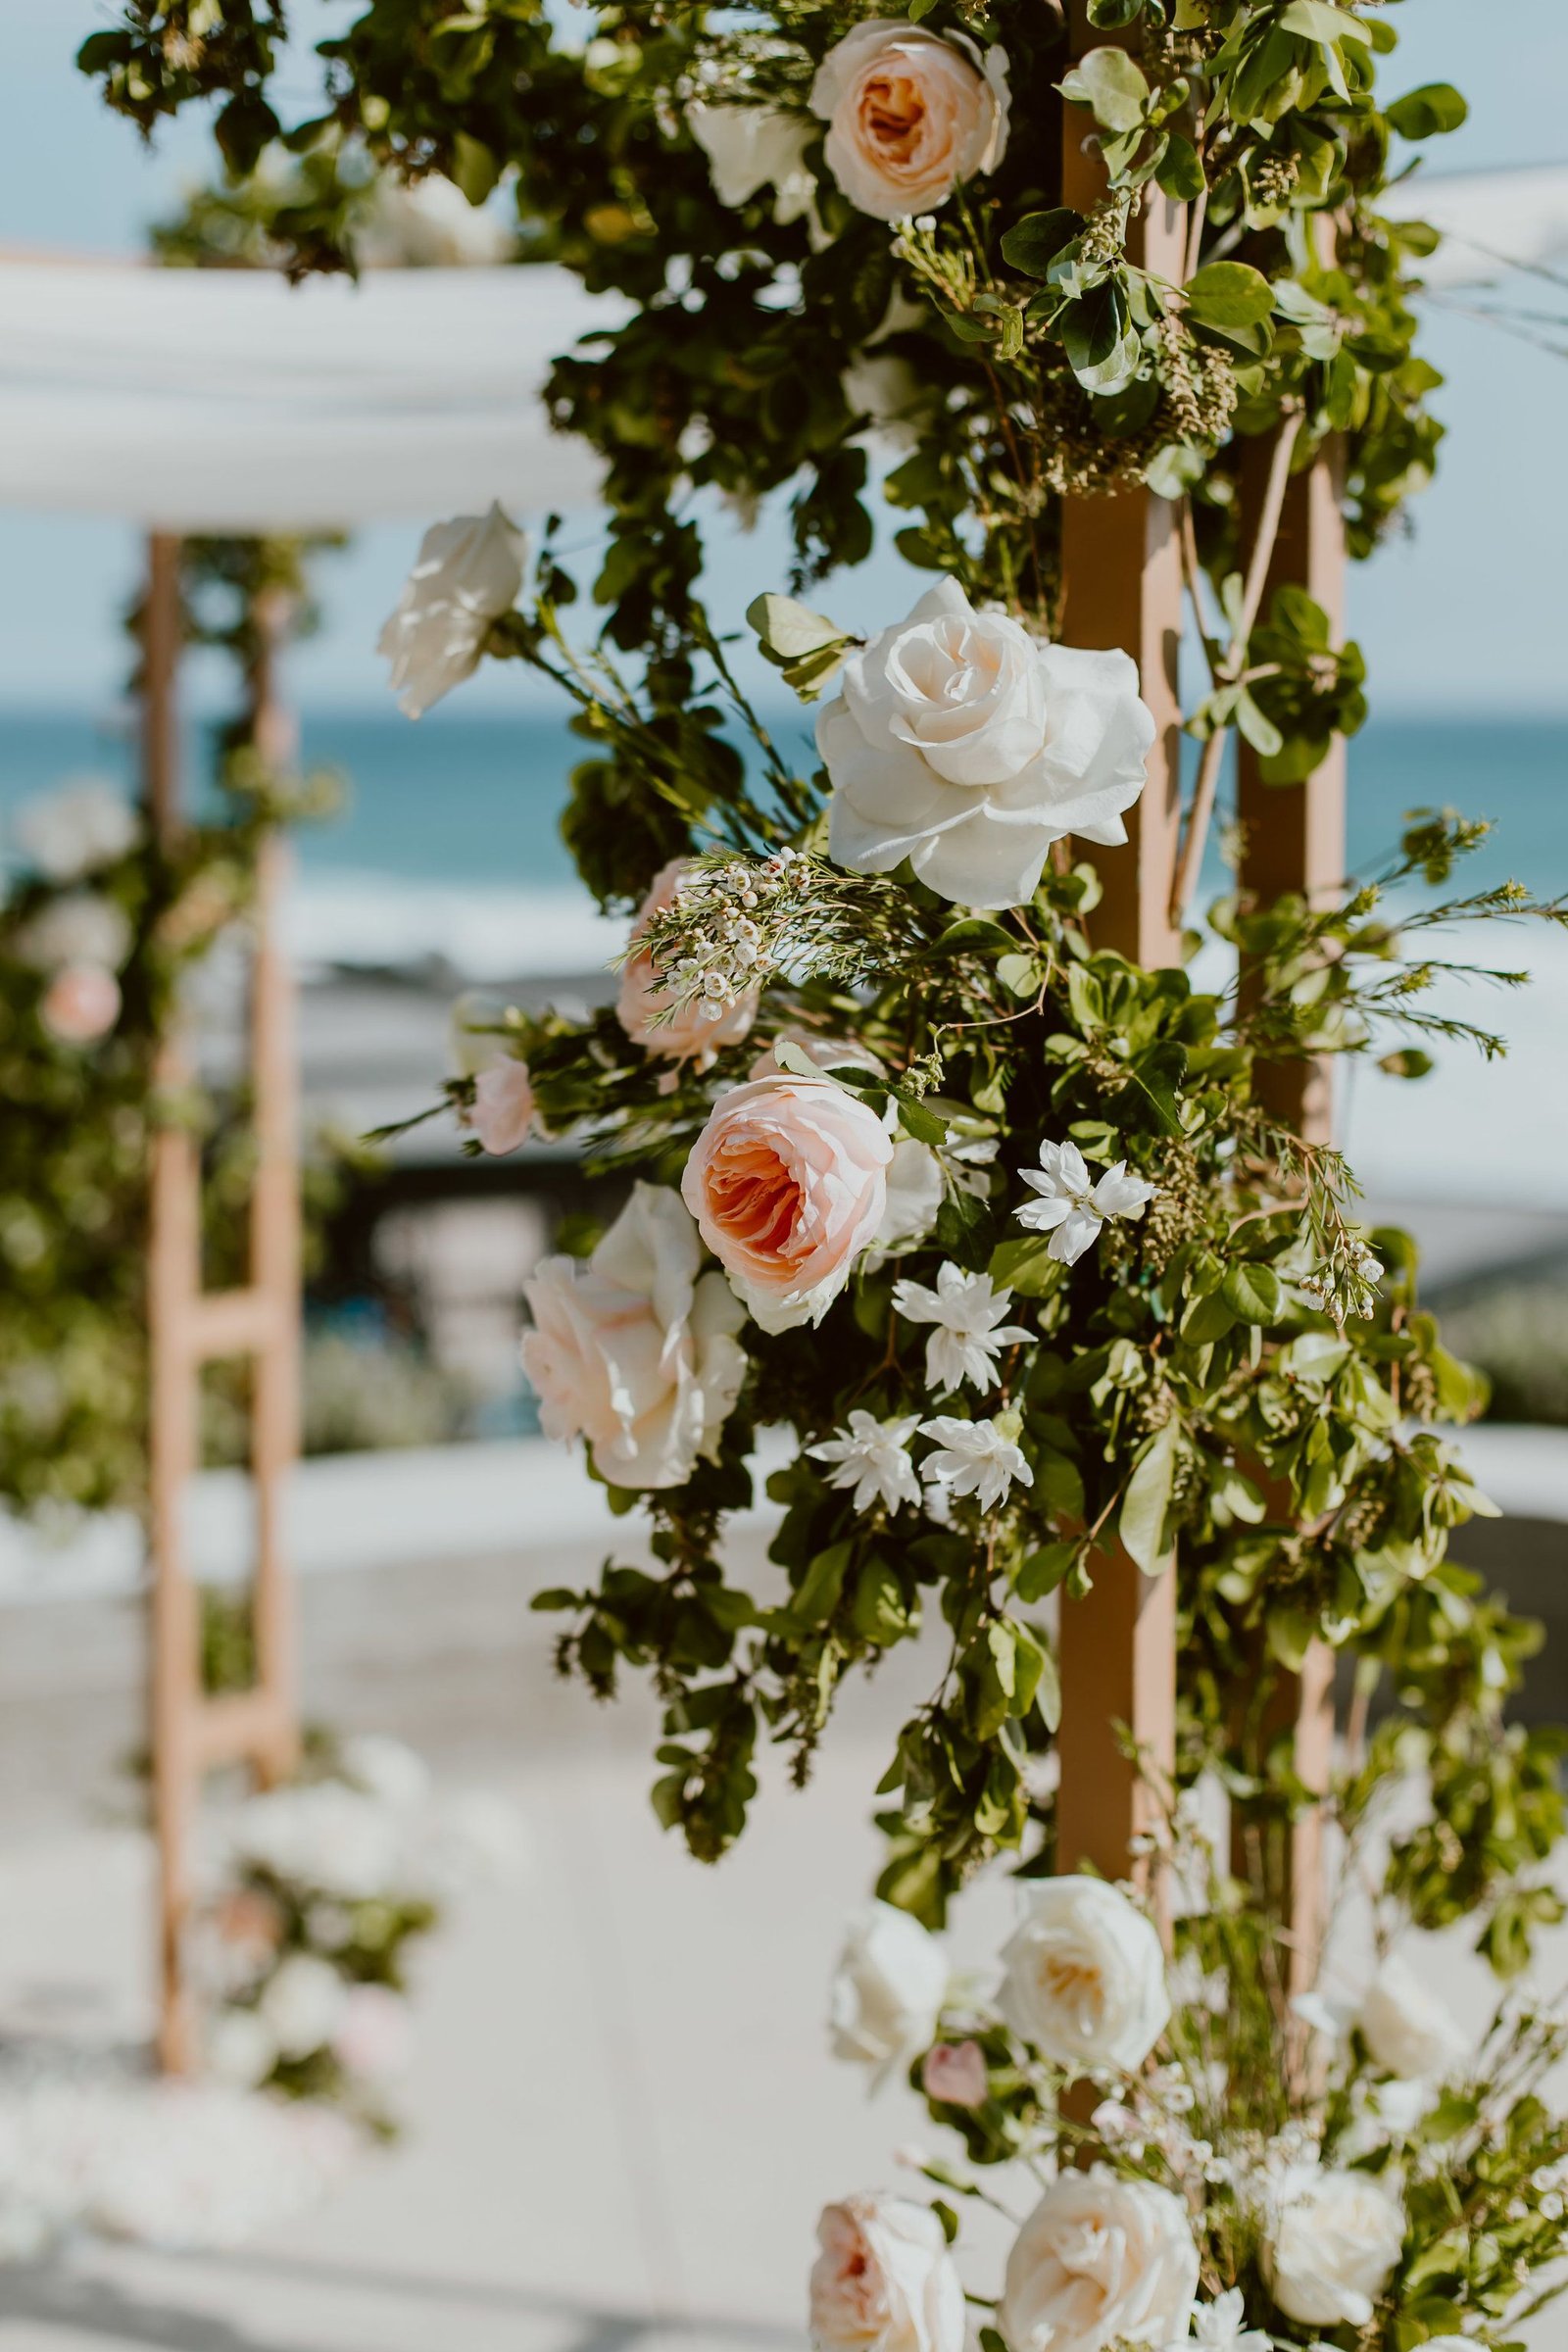 Flower details of roses, Peonies, Ranunculus and greenery for dana and JJ´s wedding at The Cape, by Thompson Hotels. Lola from Florenta Flower Design did this ceremony alter. Wedding Planning by Cabo Wedding Services